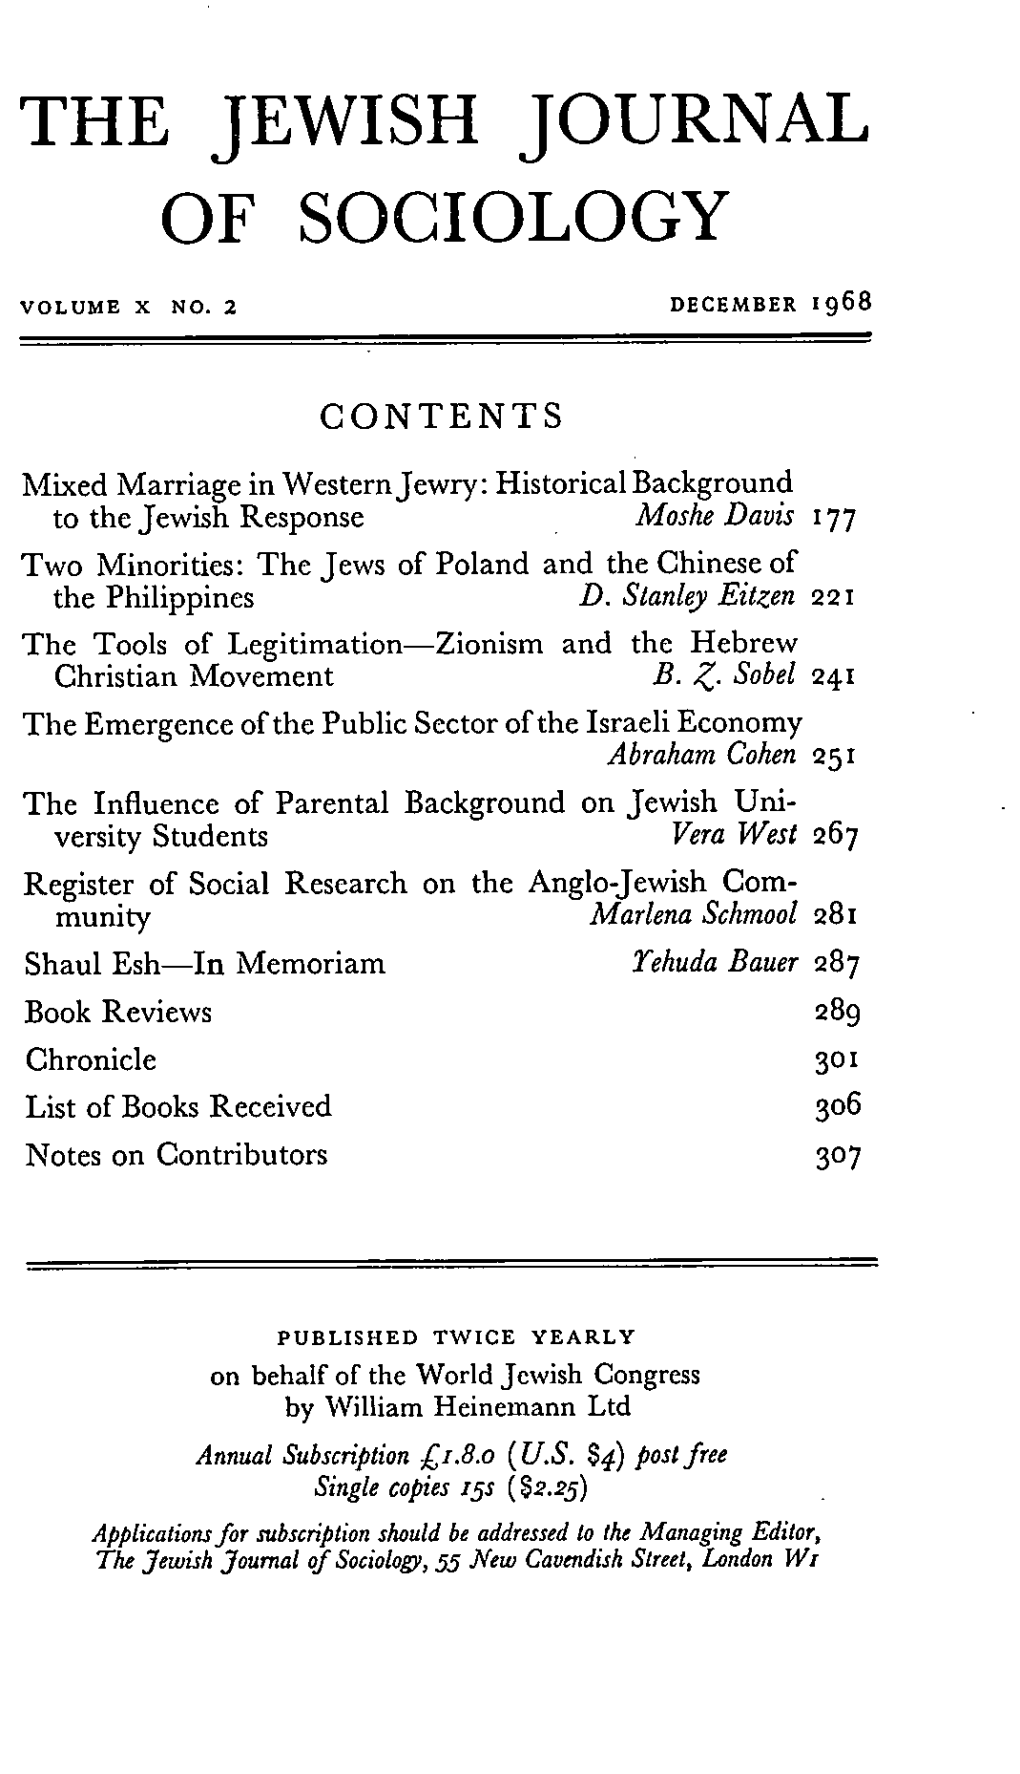 The Jewish Journal of Sociology